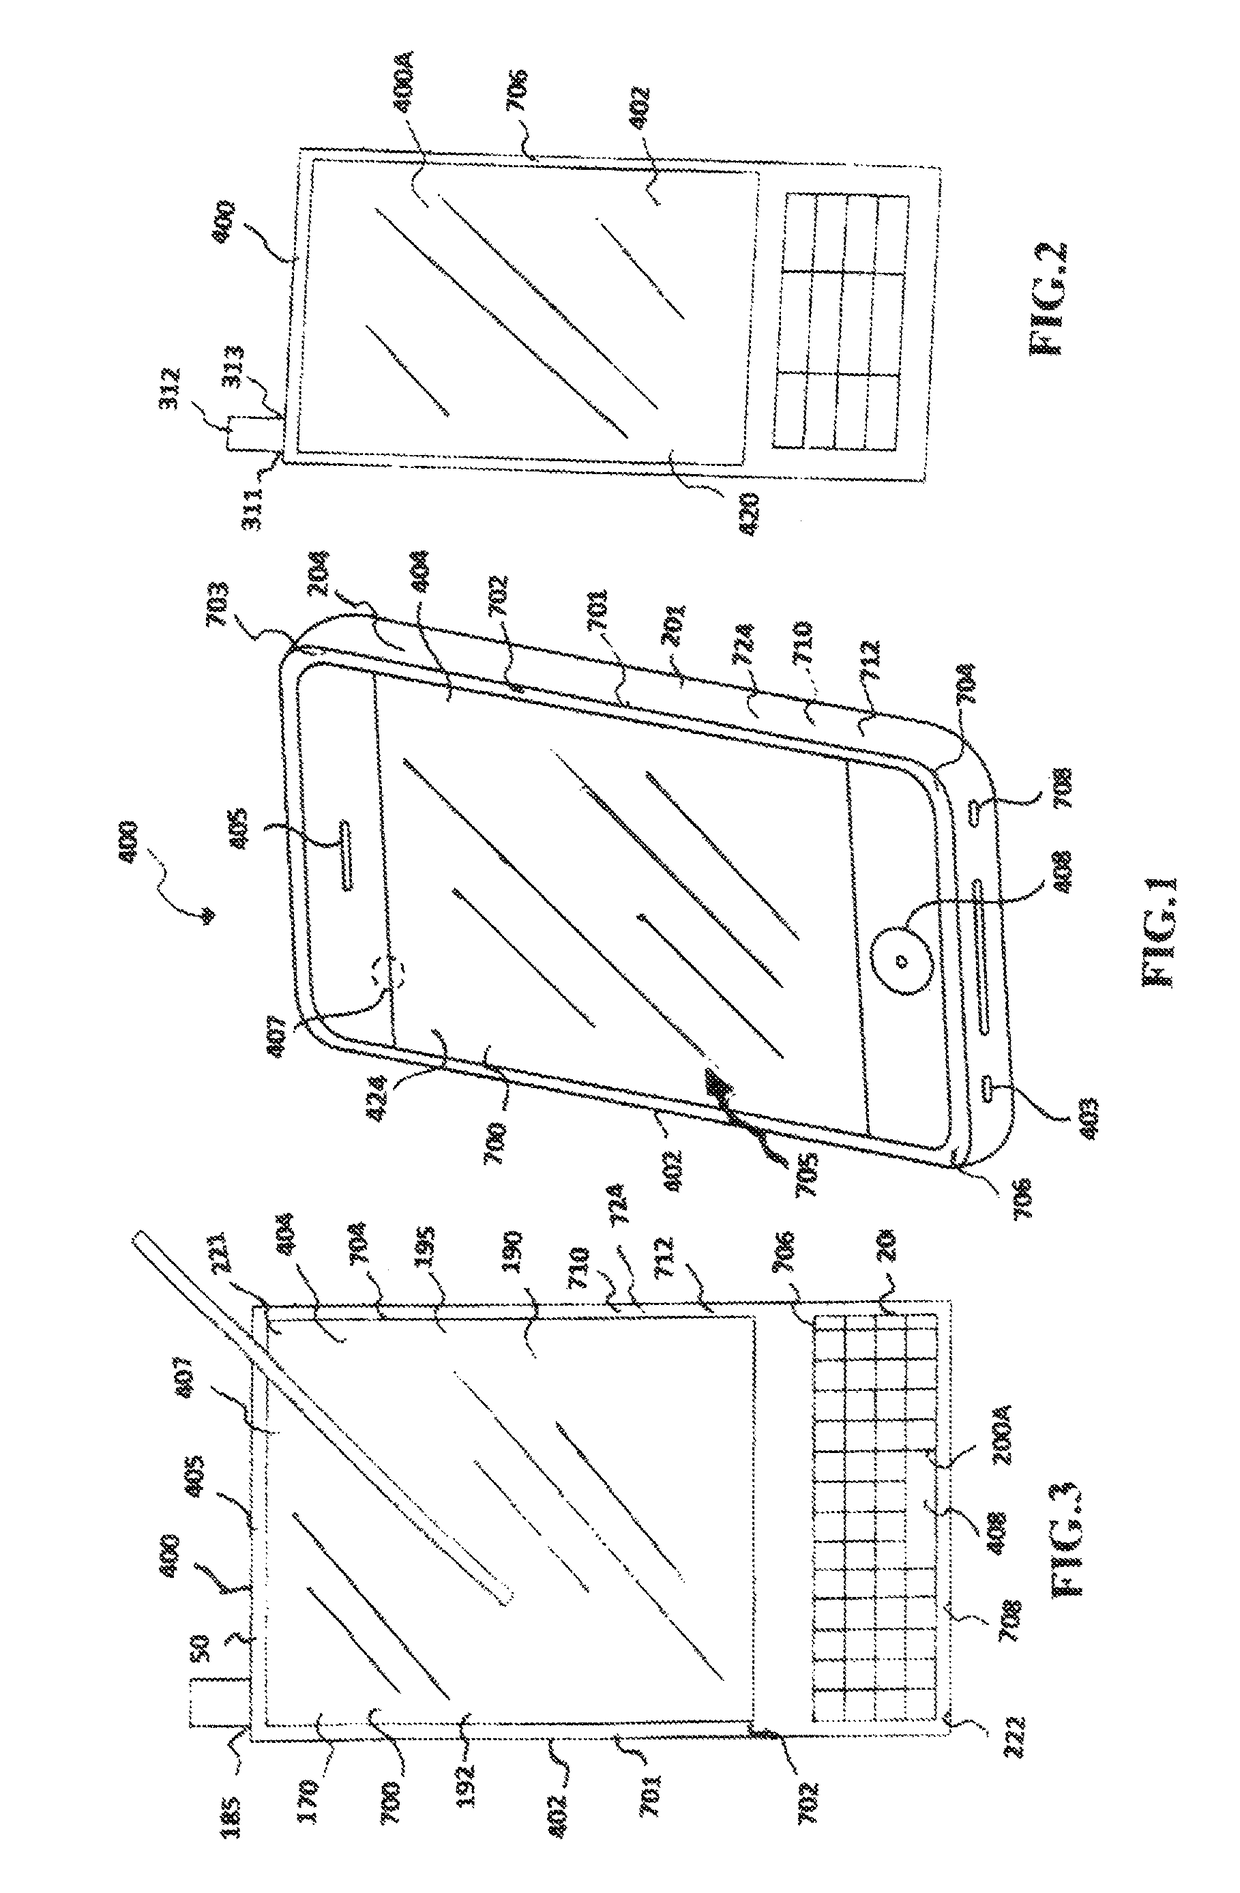 Energy harvesting computer device in association with a communication device configured with apparatus for boosting signal reception